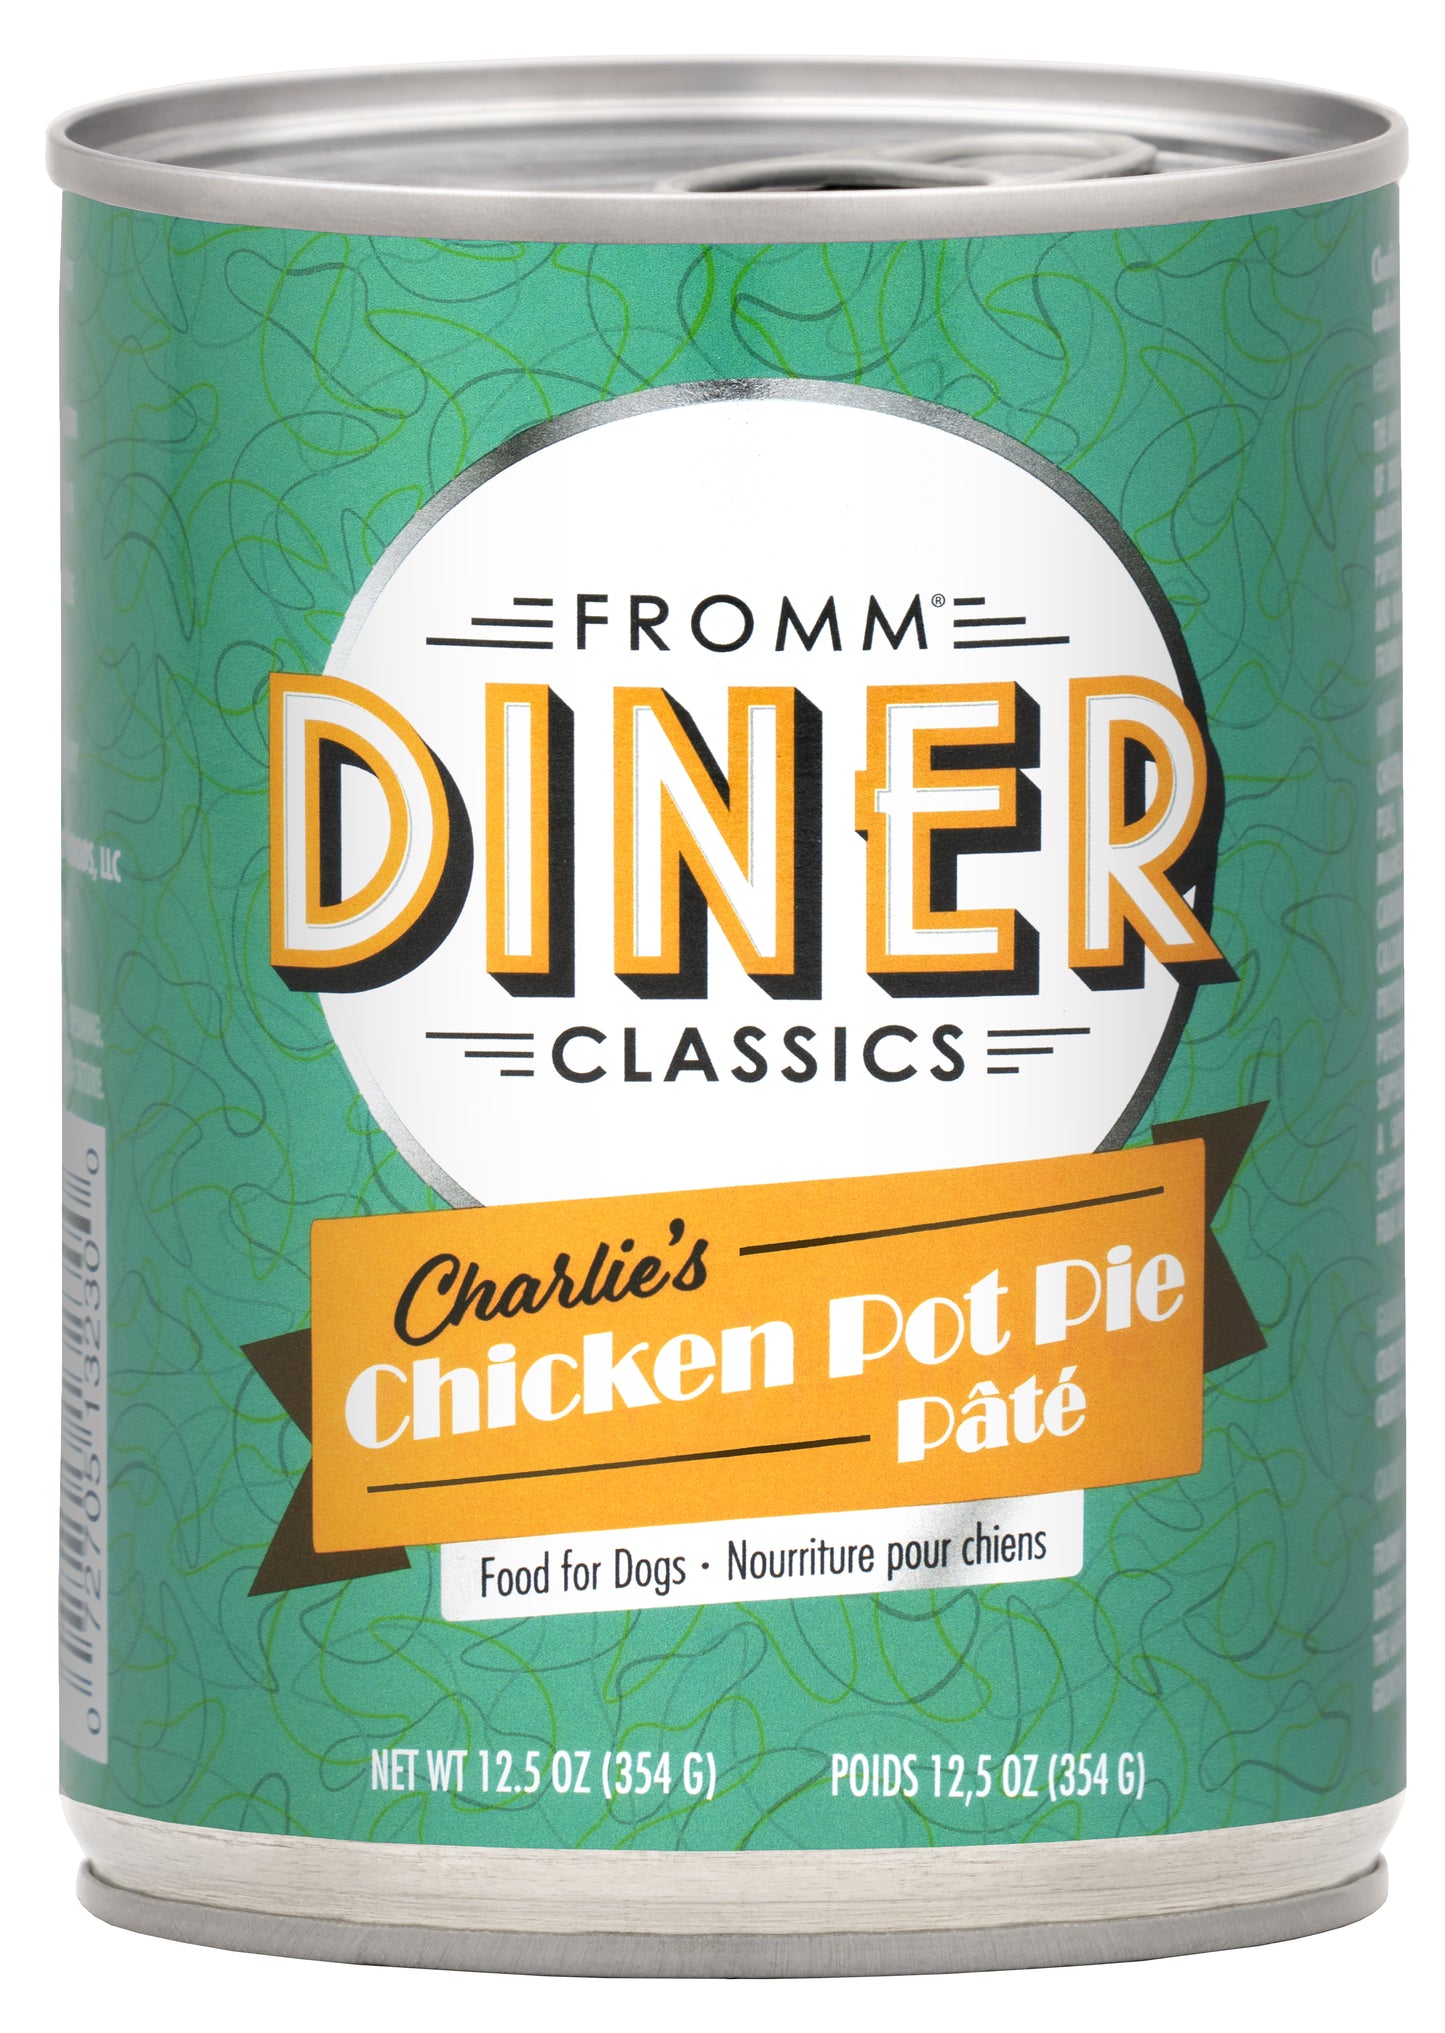 Fromm Diner Classics Charlie's Chicken Pot Pie Pate 12.5-oz, Wet Dog Food, Case Of 12